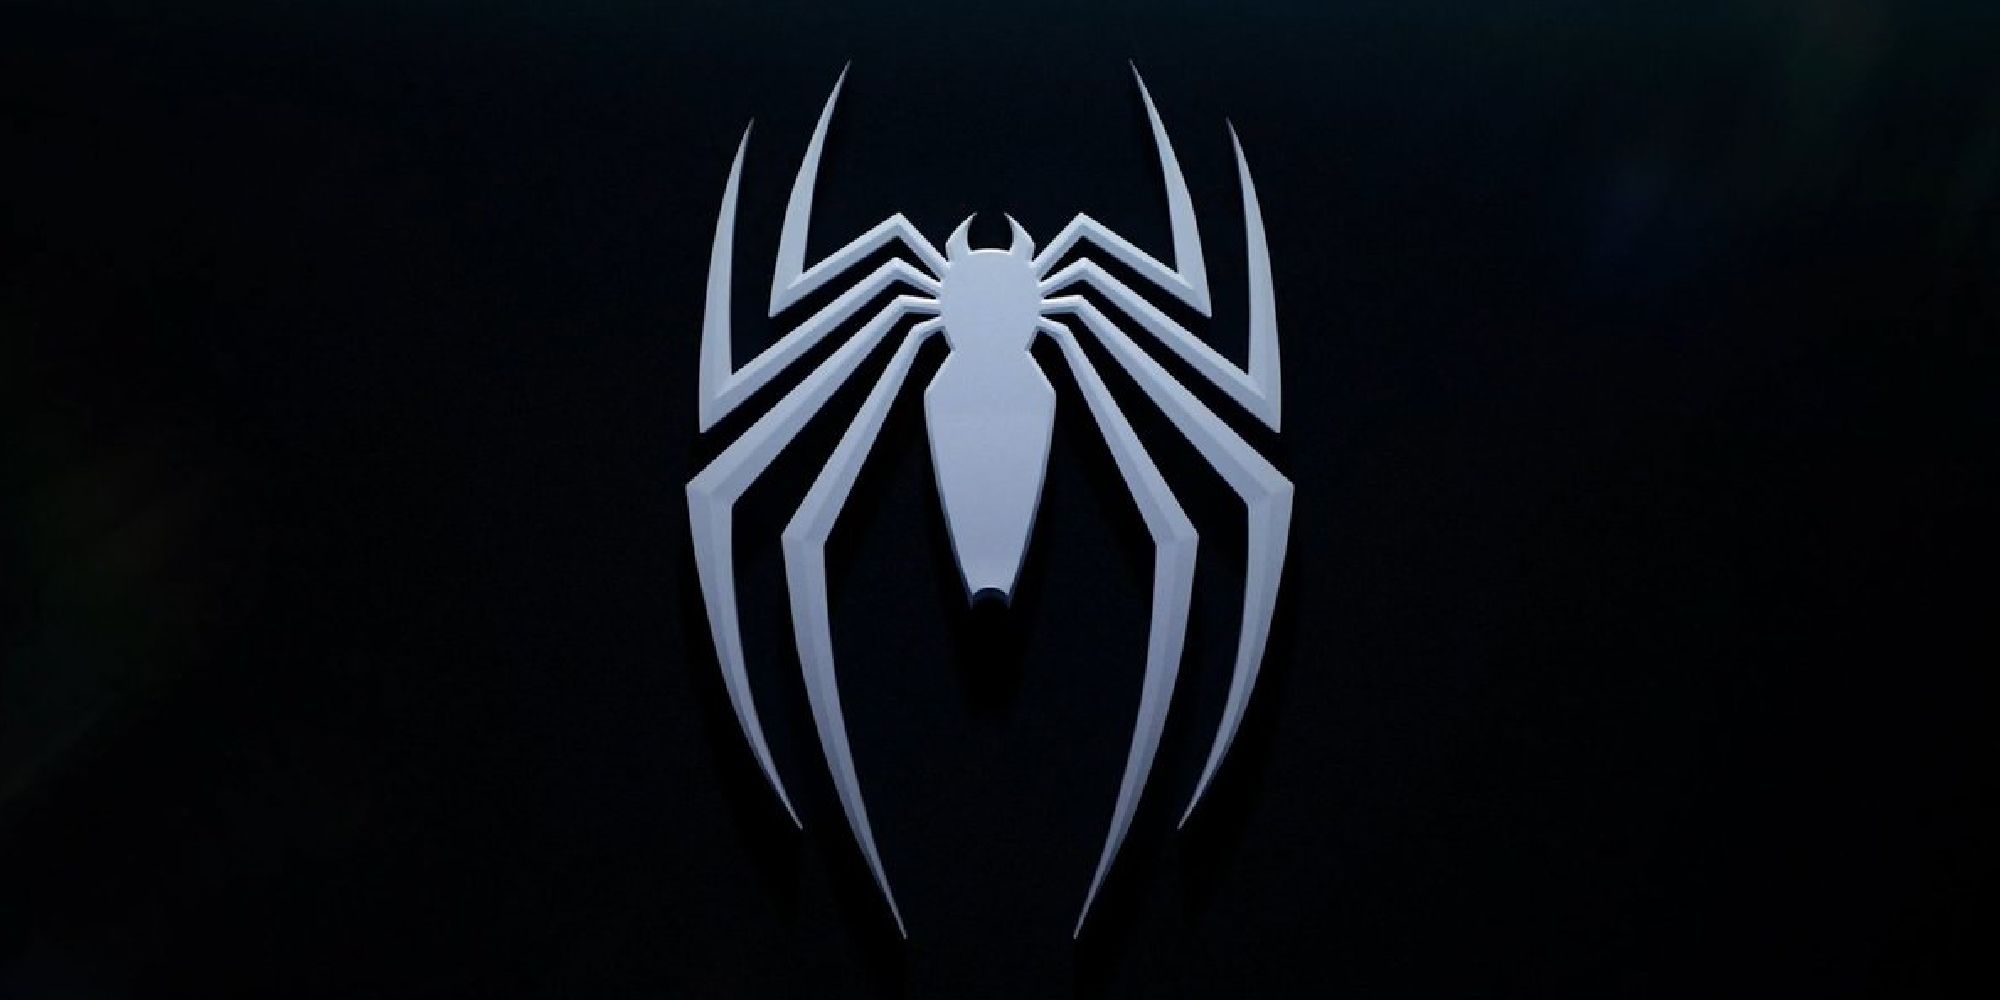 Insomniac is working on Marvel's Spider-Man 2, with Venom, for 2023